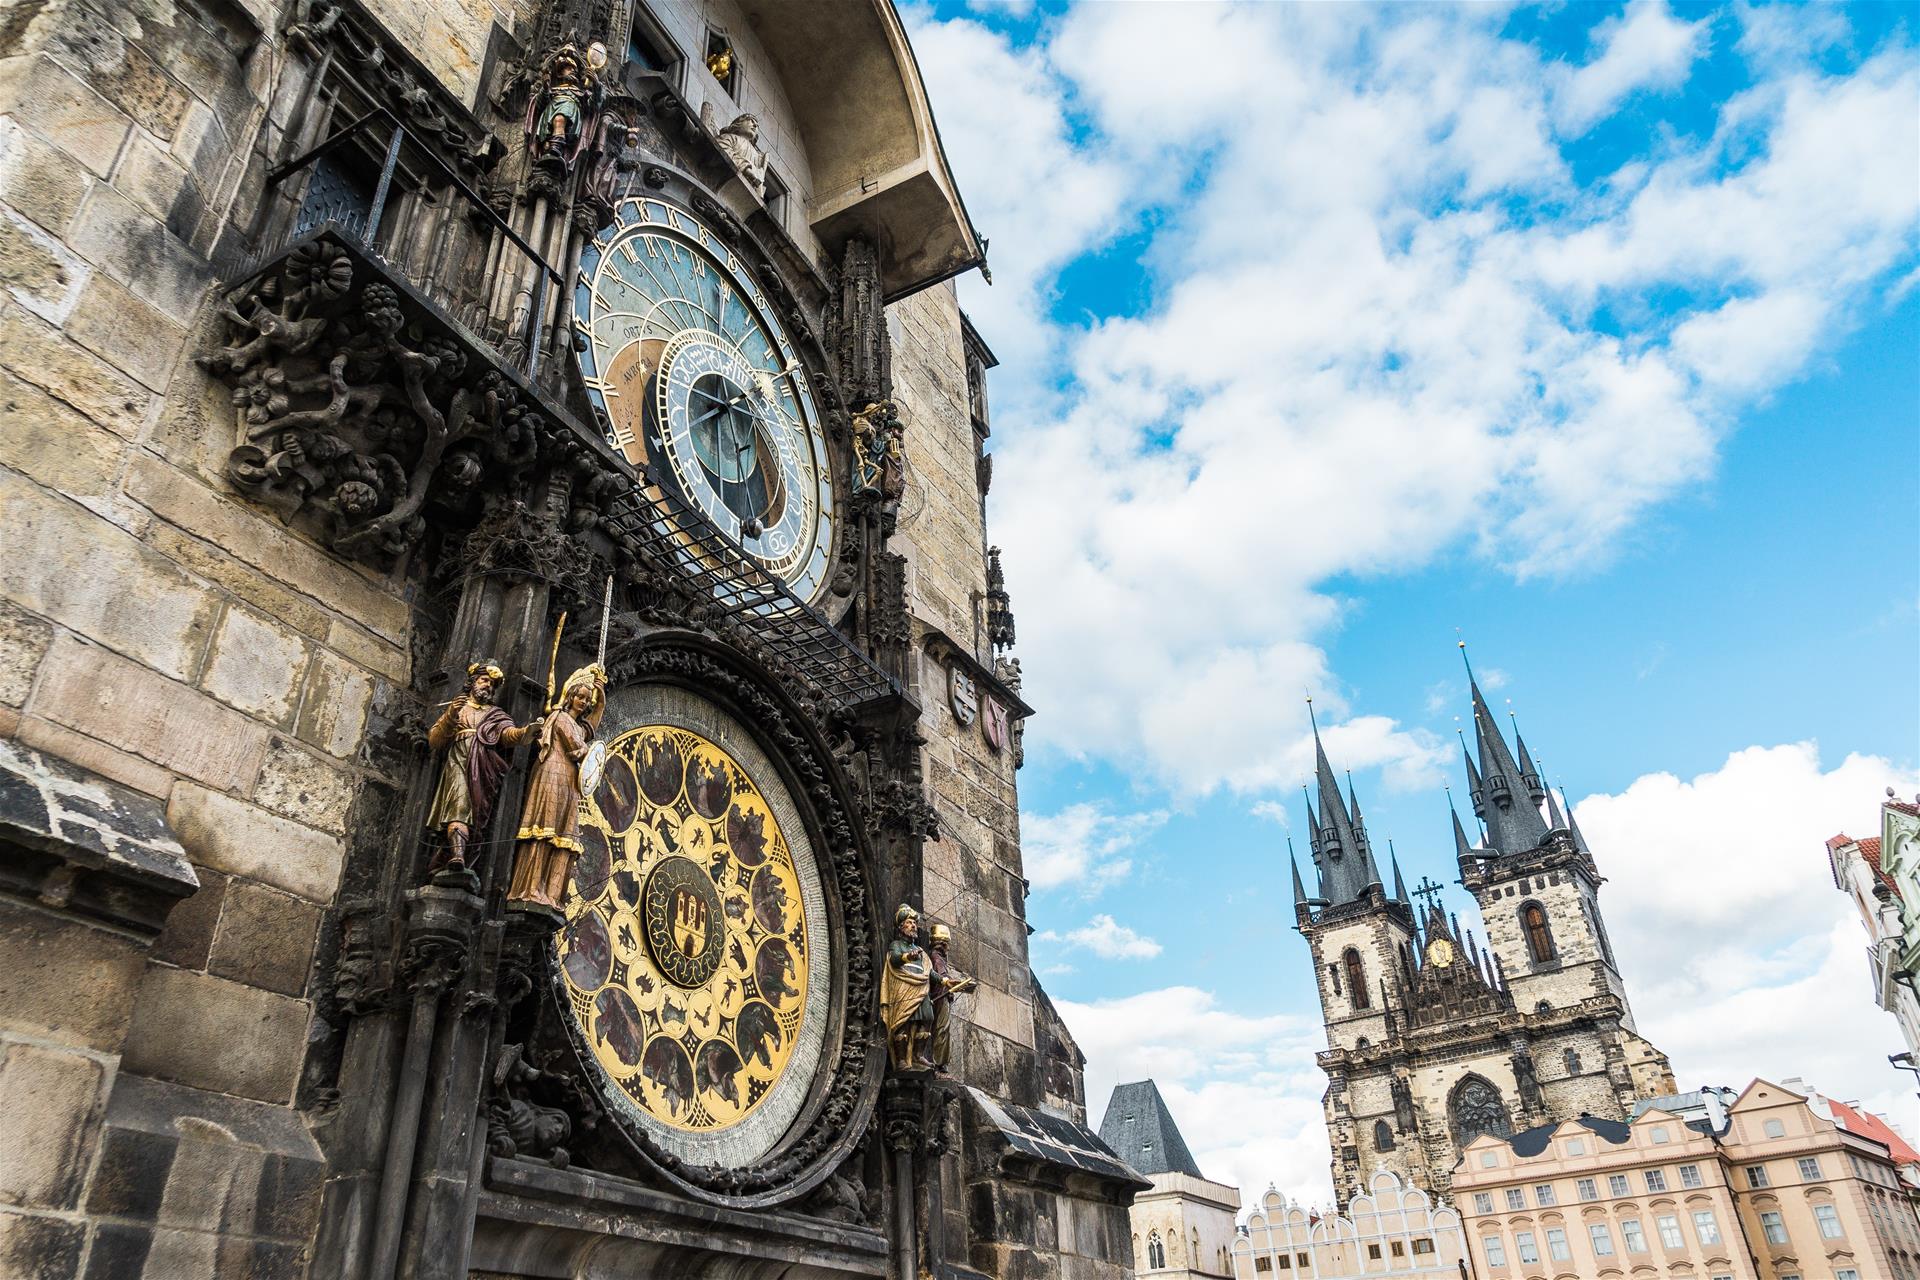 Astronomical Clock in the Old Town Square, Prague Free Image Download